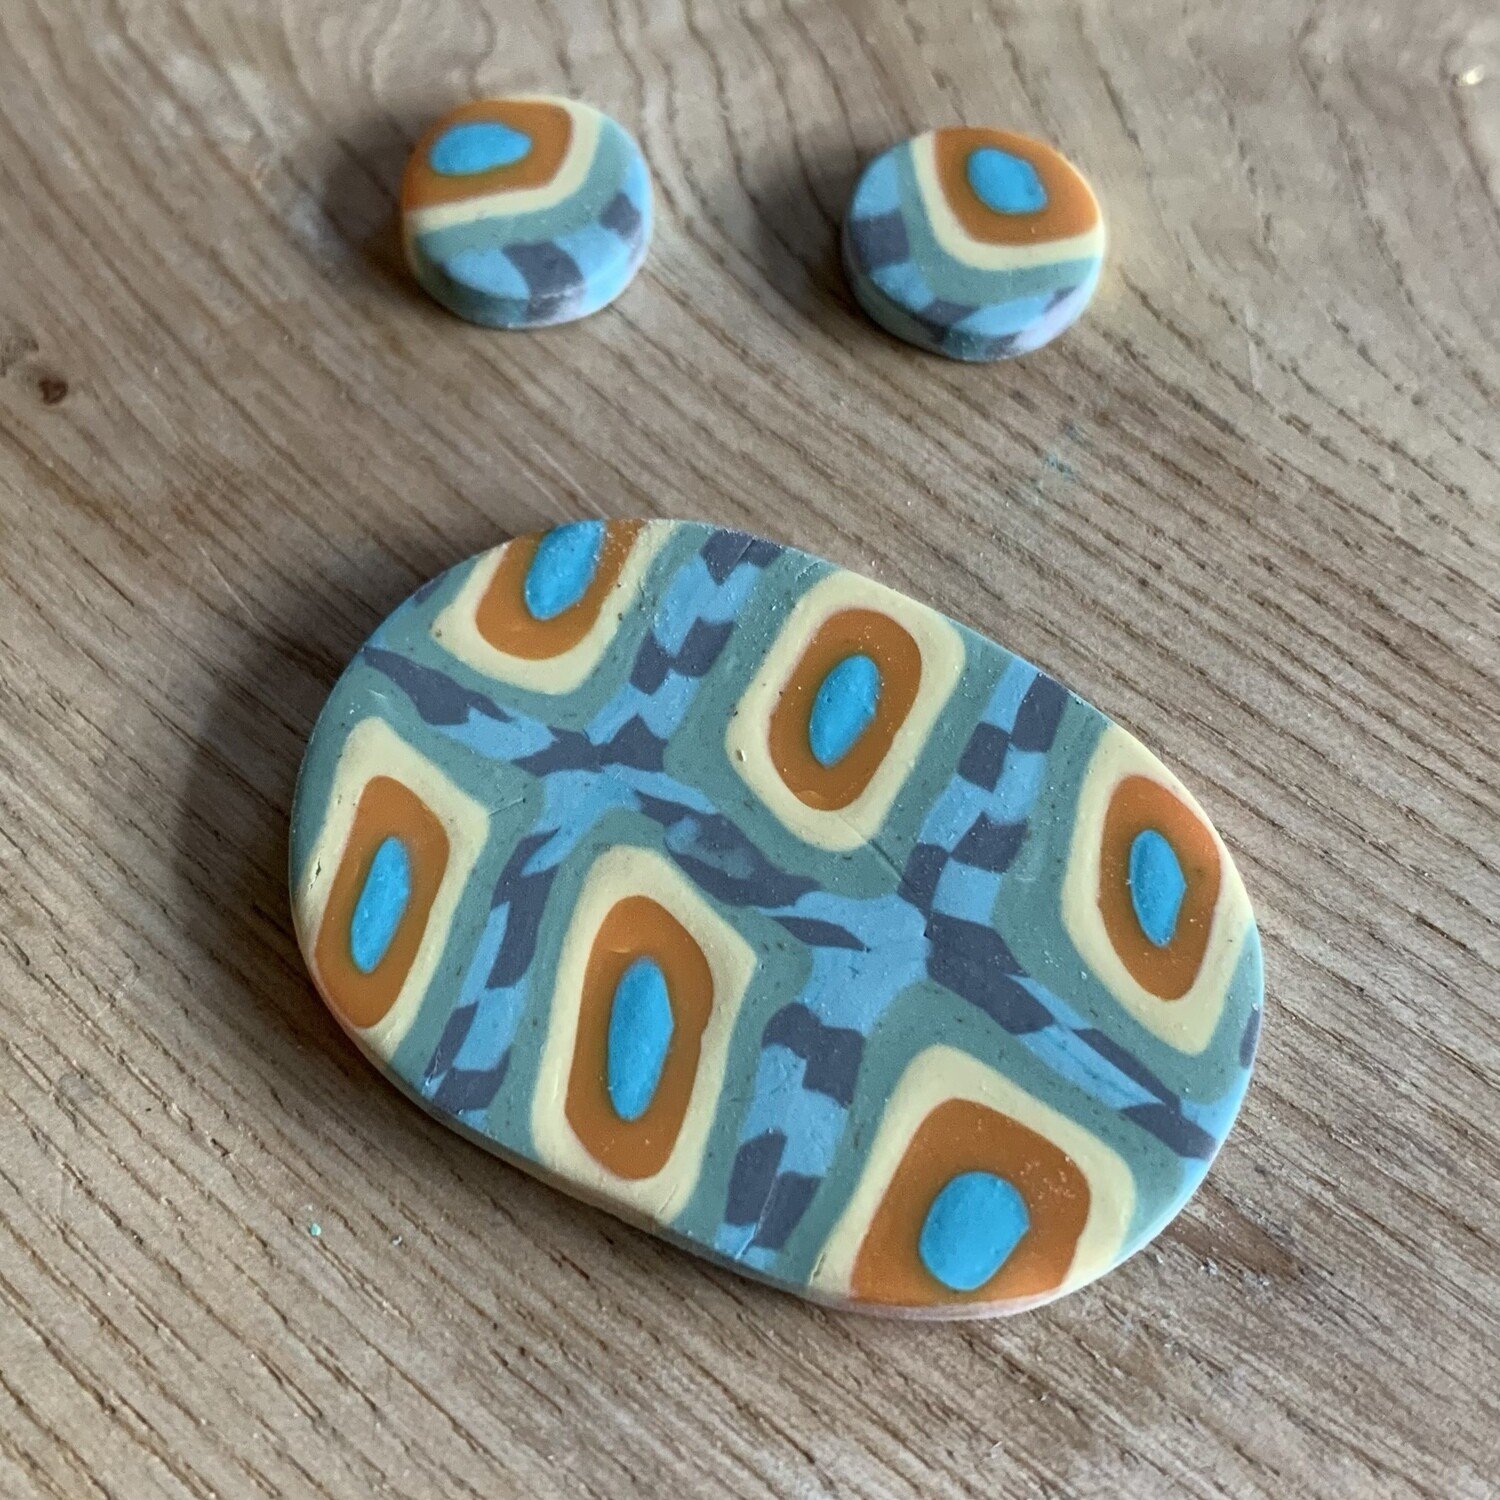 Polymer Clay Jewellery from Home - One to One - 1 Day